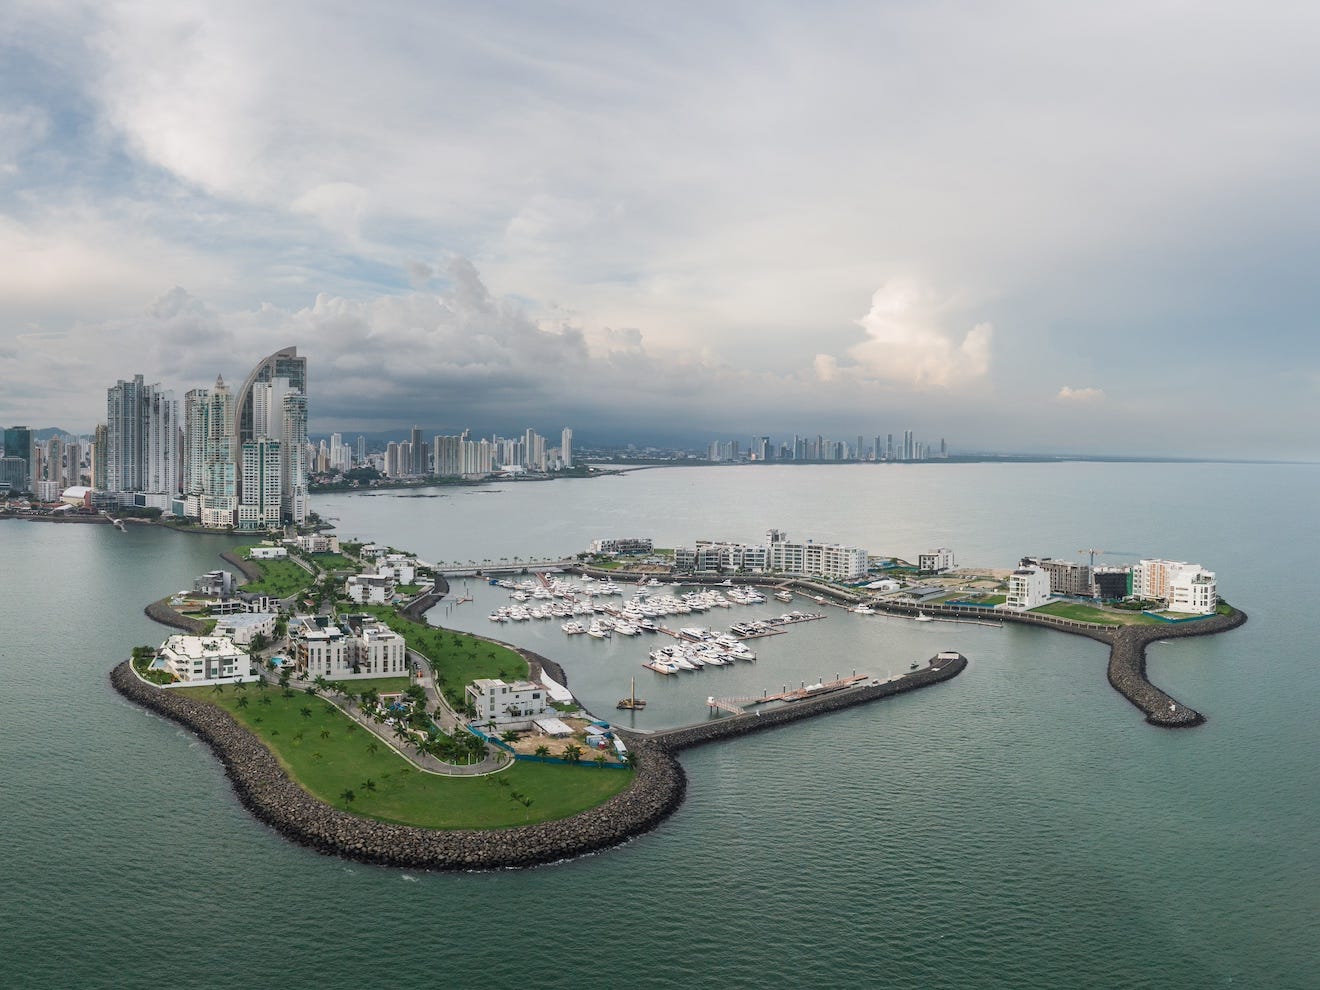 <p>According to <a href="https://www.nytimes.com/2014/04/04/greathomesanddestinations/panama-seizes-on-glimmers-of-real-estate-resurgence.html">The New York Times</a>, Empresas ICA announced plans to construct the two islands in 1998, around the same time the creation of Punta Pacifica was announced. Grupo Los Pueblos, a Panamanian company, was hired by Empresas ICA as the project's developer.</p><p>The project was largely completed in 2016, McGowan said.</p><p>"It is more expensive because they had to create the islands," McGowan said. "So the land itself has more value."</p>